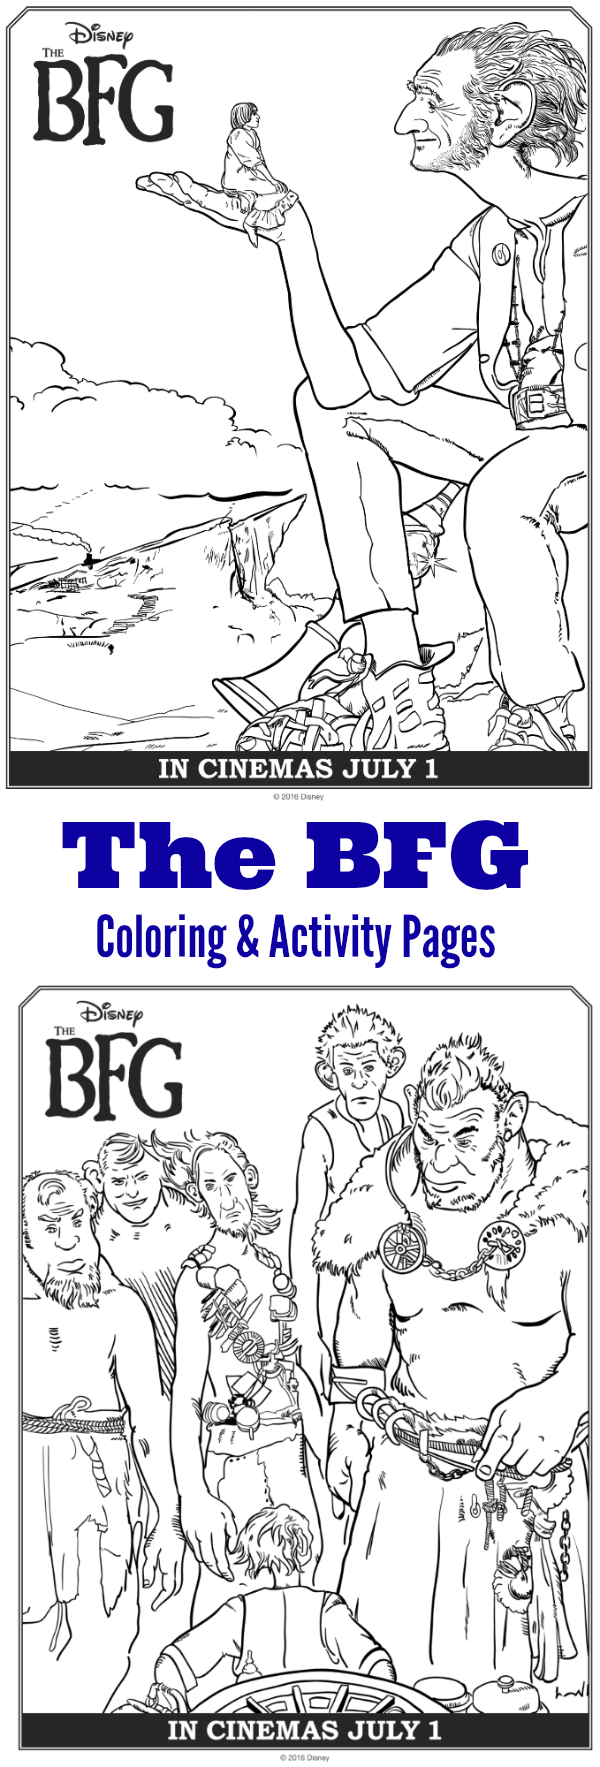 Disney's The BFG Coloring Pages And Activity Pages - TheSuburbanMom